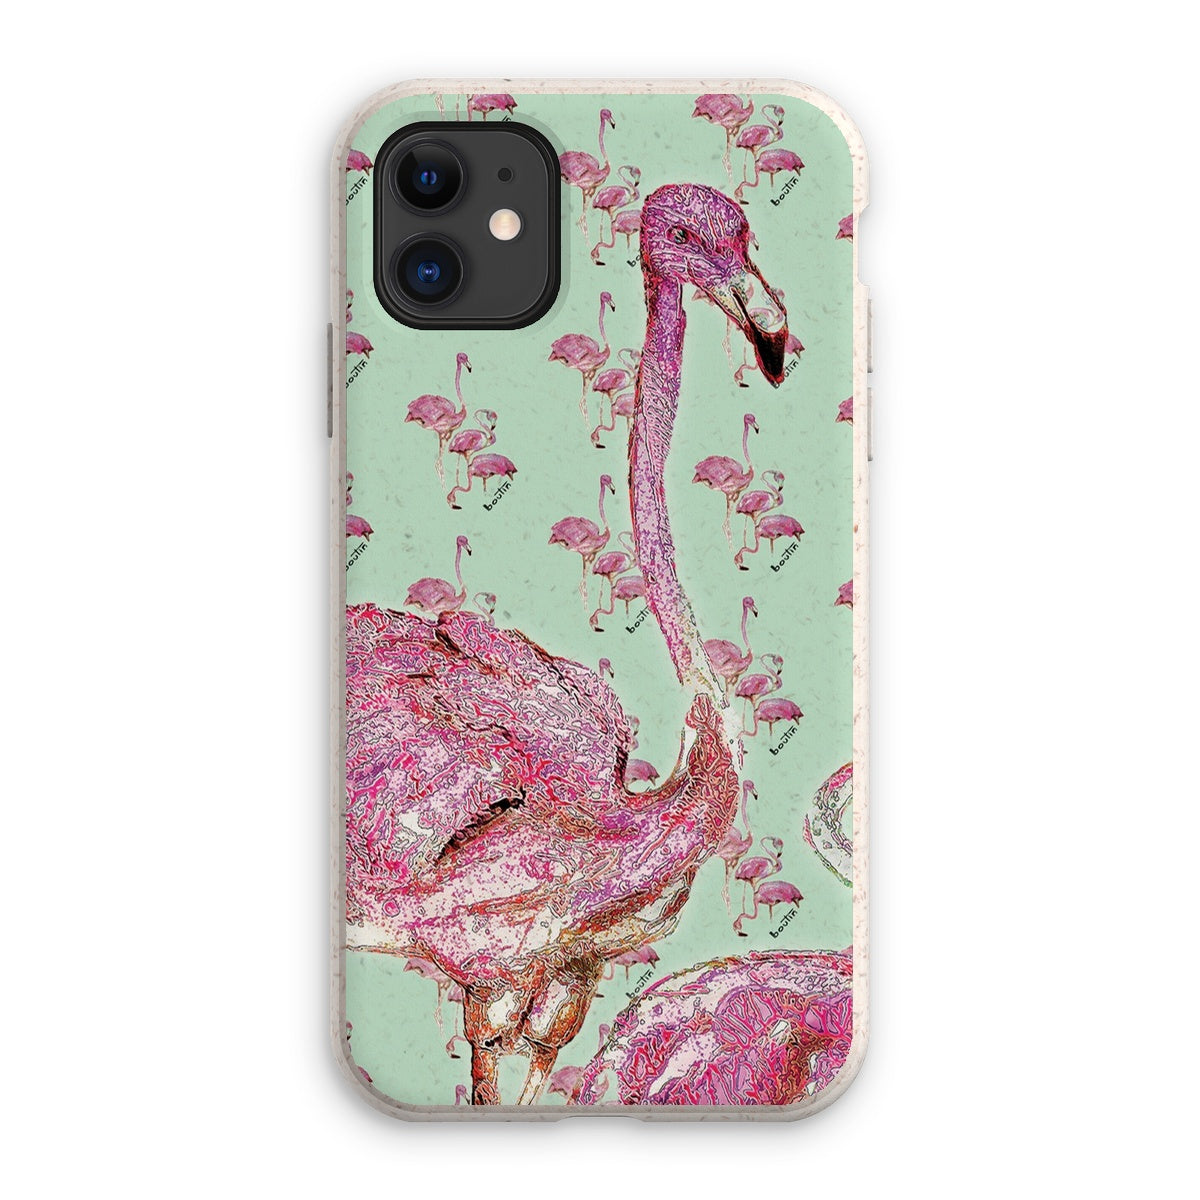 Flamingo green eco-friendly cell phone case